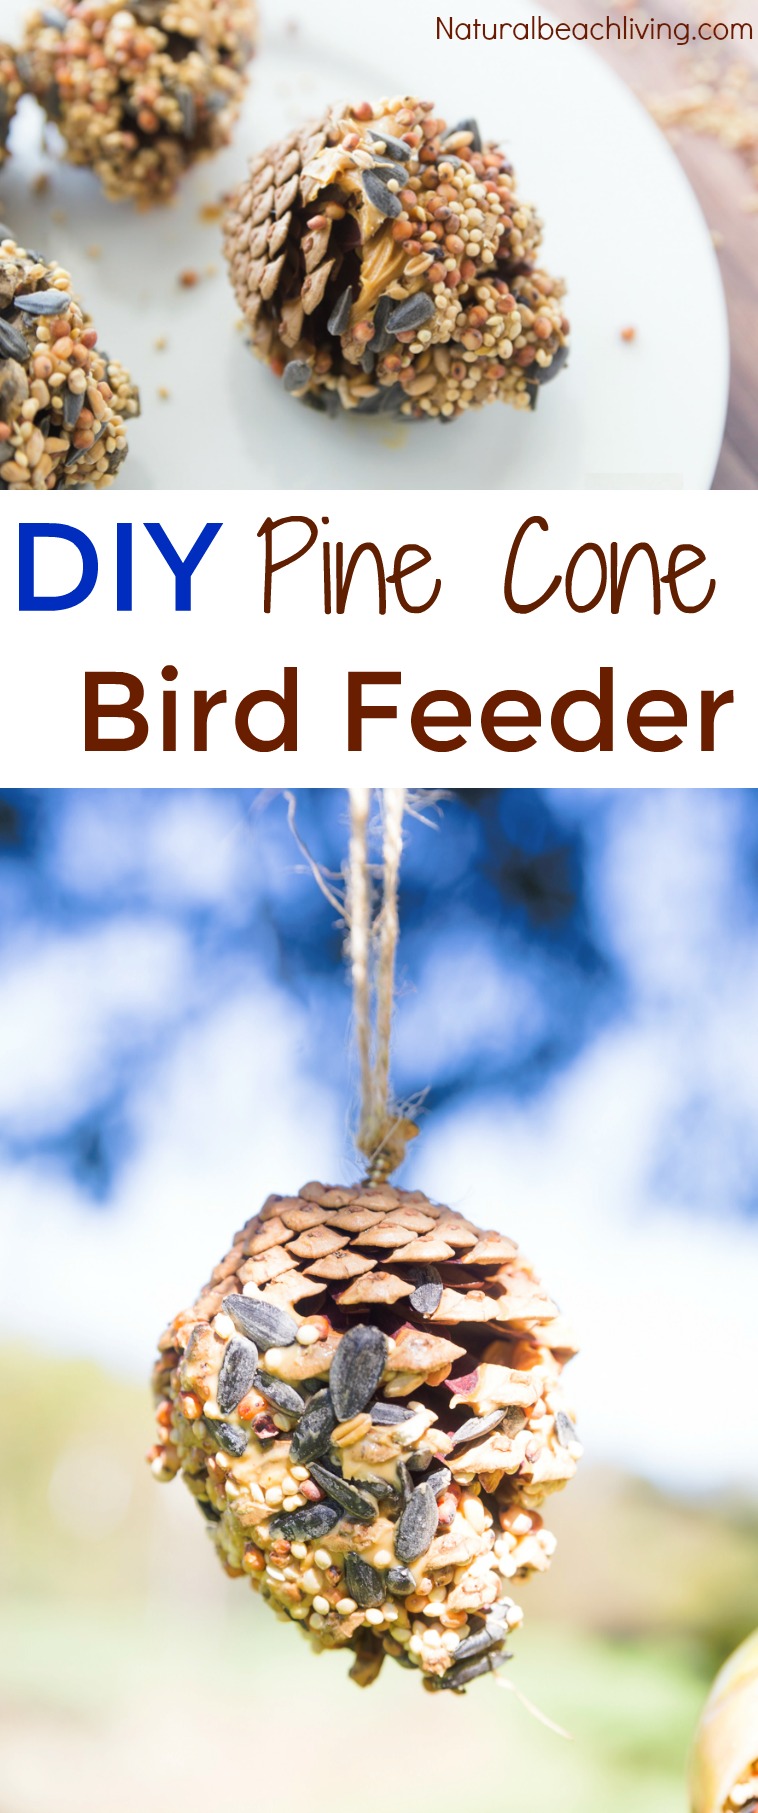 20+ Homemade Bird Feeders, Bird Feeders for Kids, These Homemade Bird Feeders and birdseed ornaments are easy to make and they look so nice hanging on the trees. Your kids will love making Apple Bird Feeders, Pine Cone bird feeder and Bird Seed Ornaments  